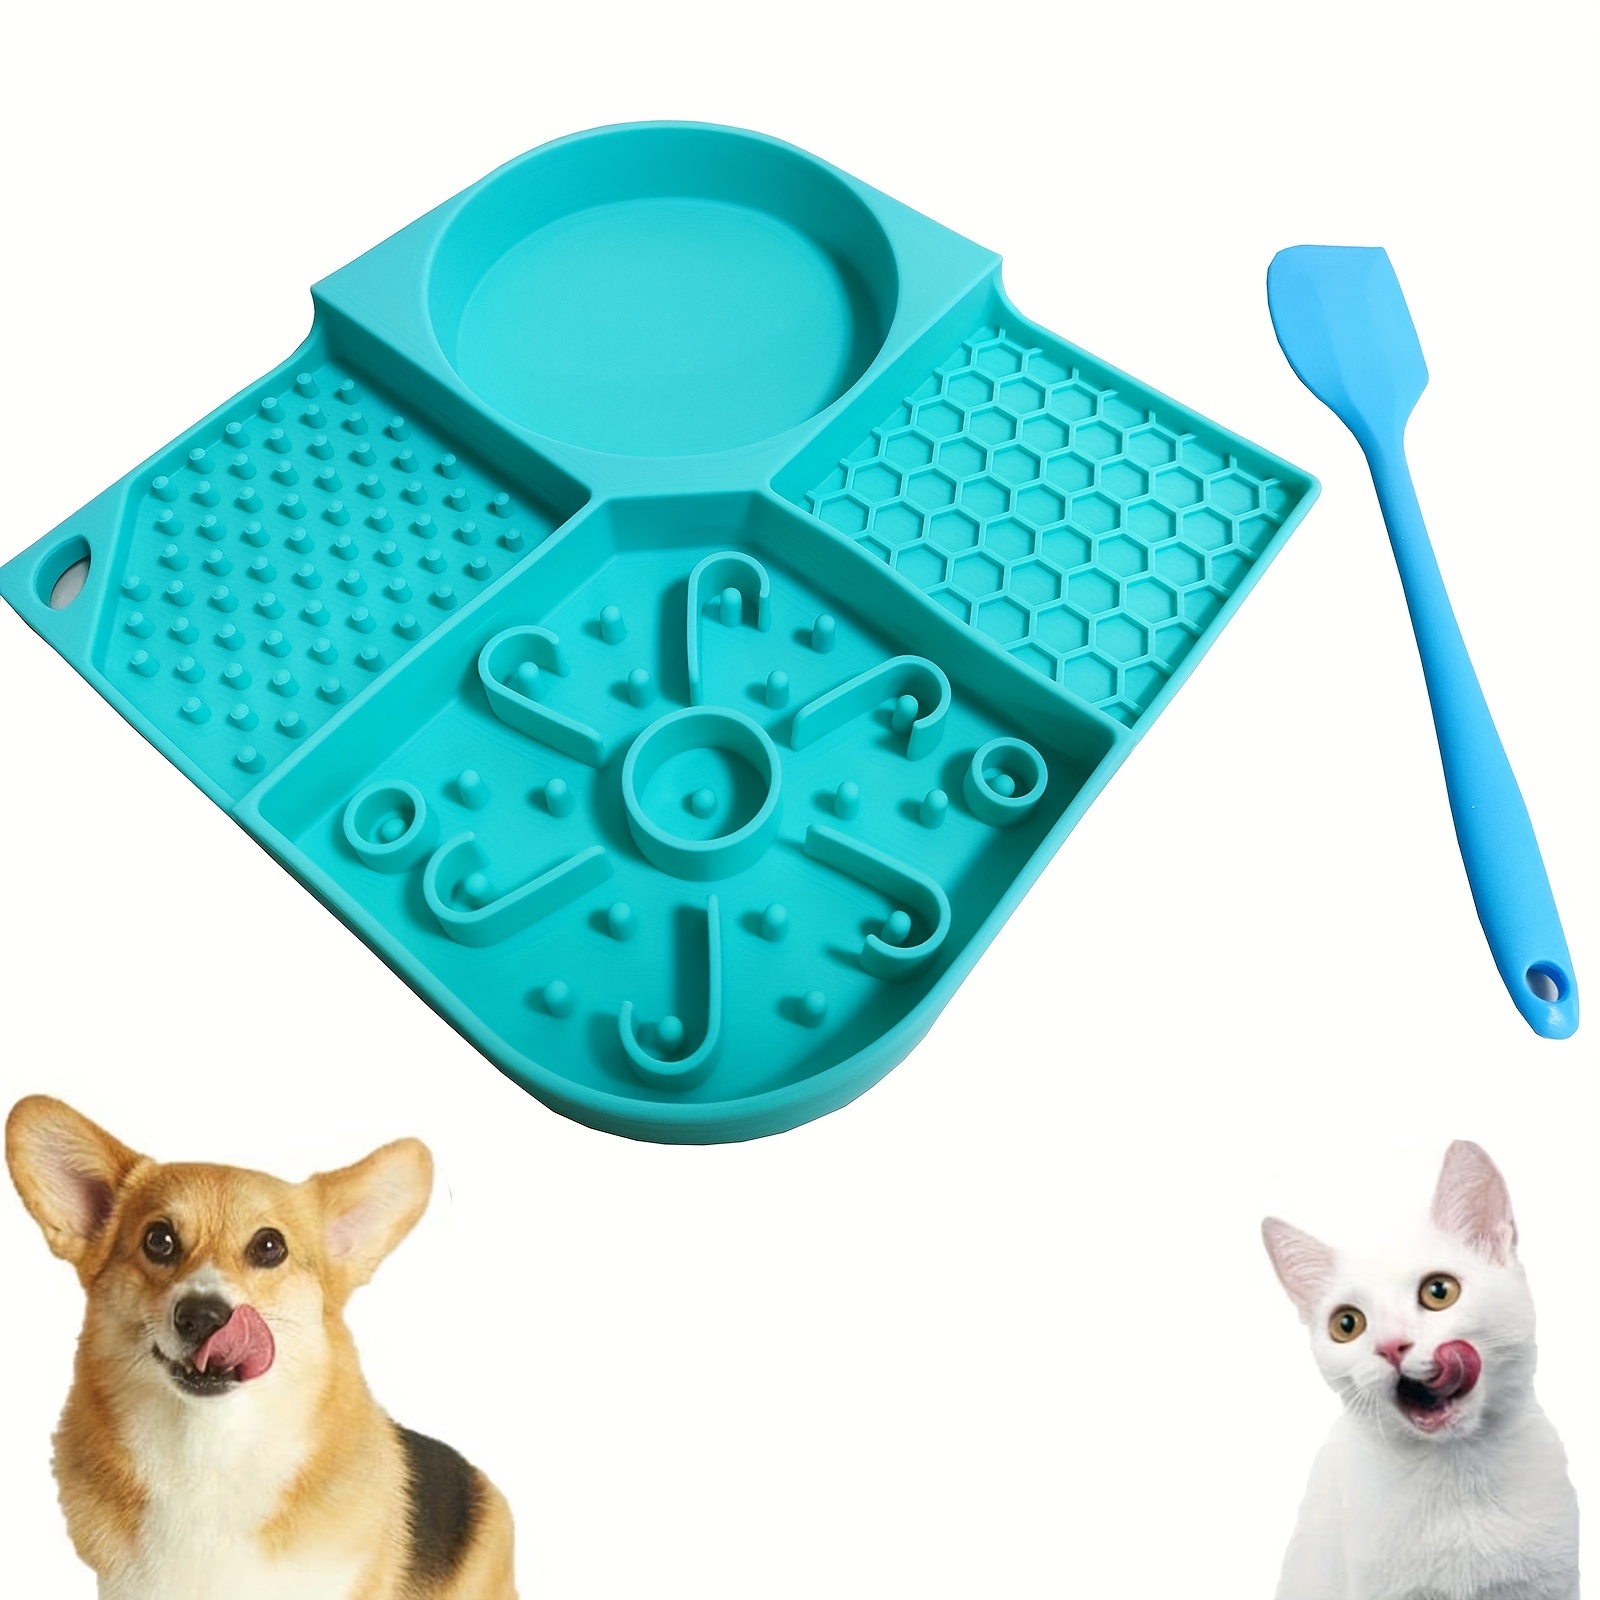 Dog Crate Training & Behavior Aids for Puppies,Crate Toys for Dogs Anxiety  Relief Boredom and Stimulating Slow Feeder Lick Plate Training Tool